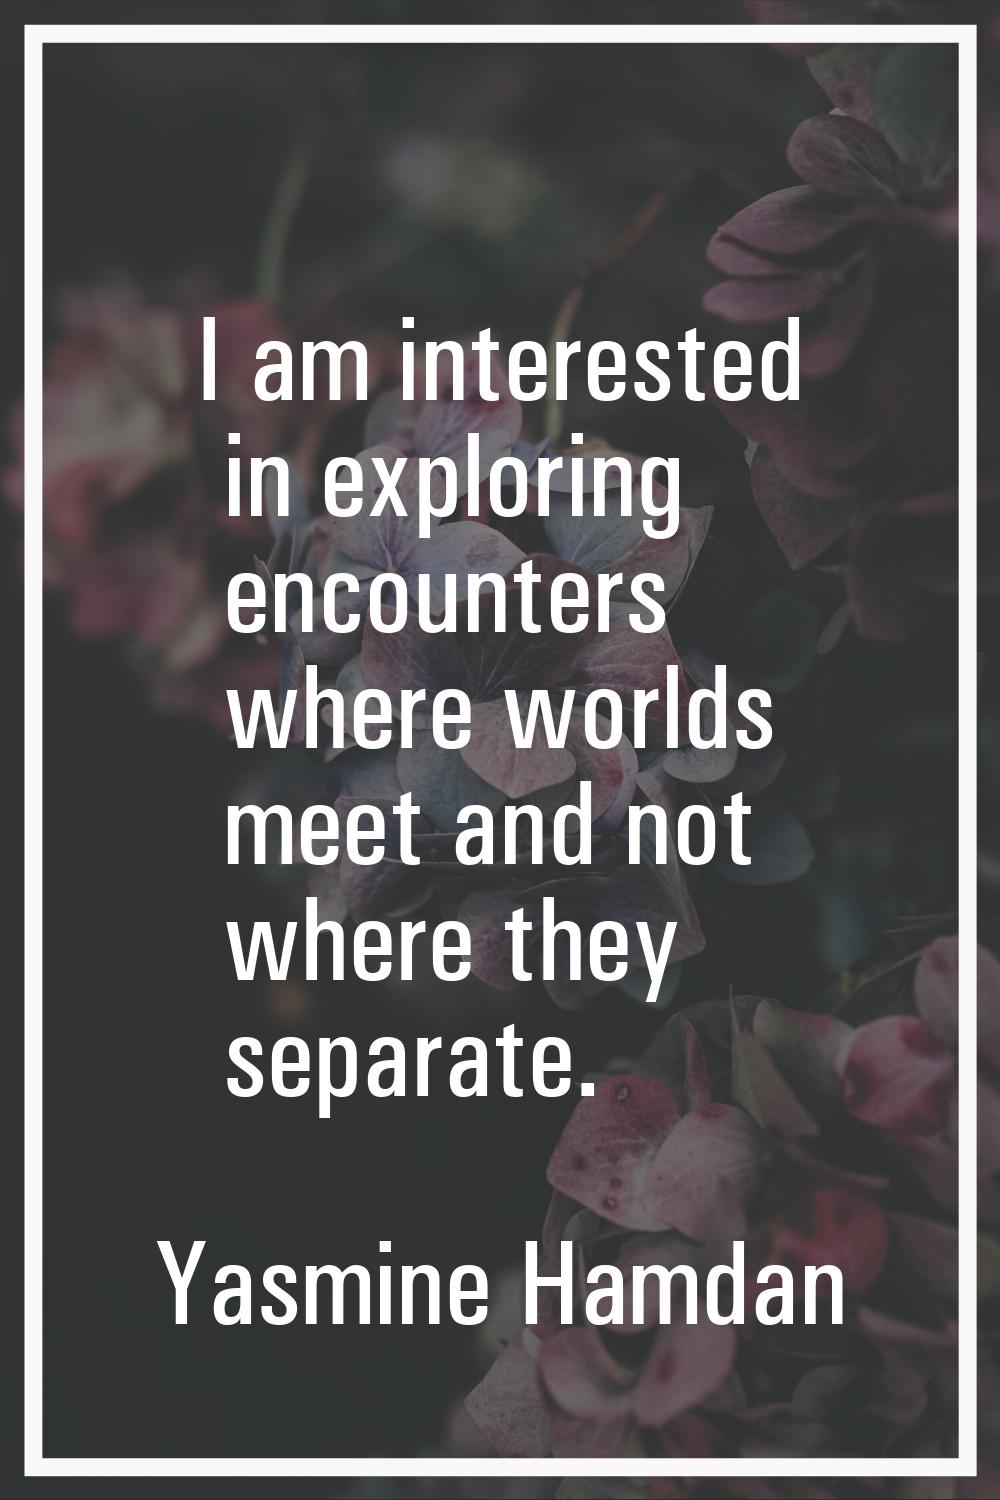 I am interested in exploring encounters where worlds meet and not where they separate.